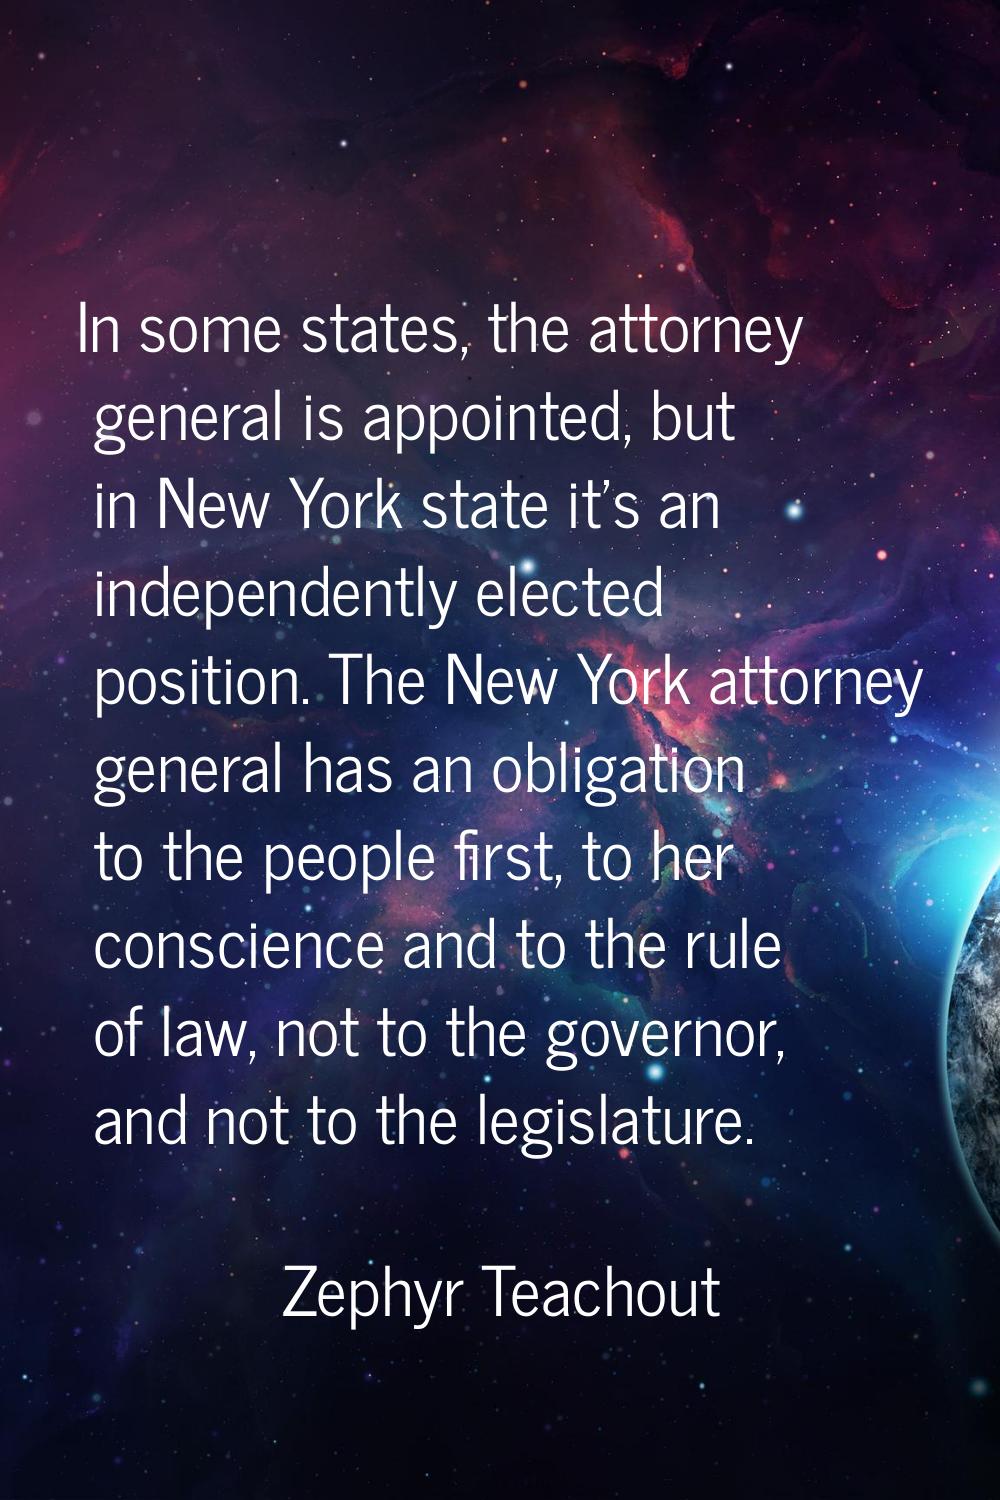 In some states, the attorney general is appointed, but in New York state it's an independently elec